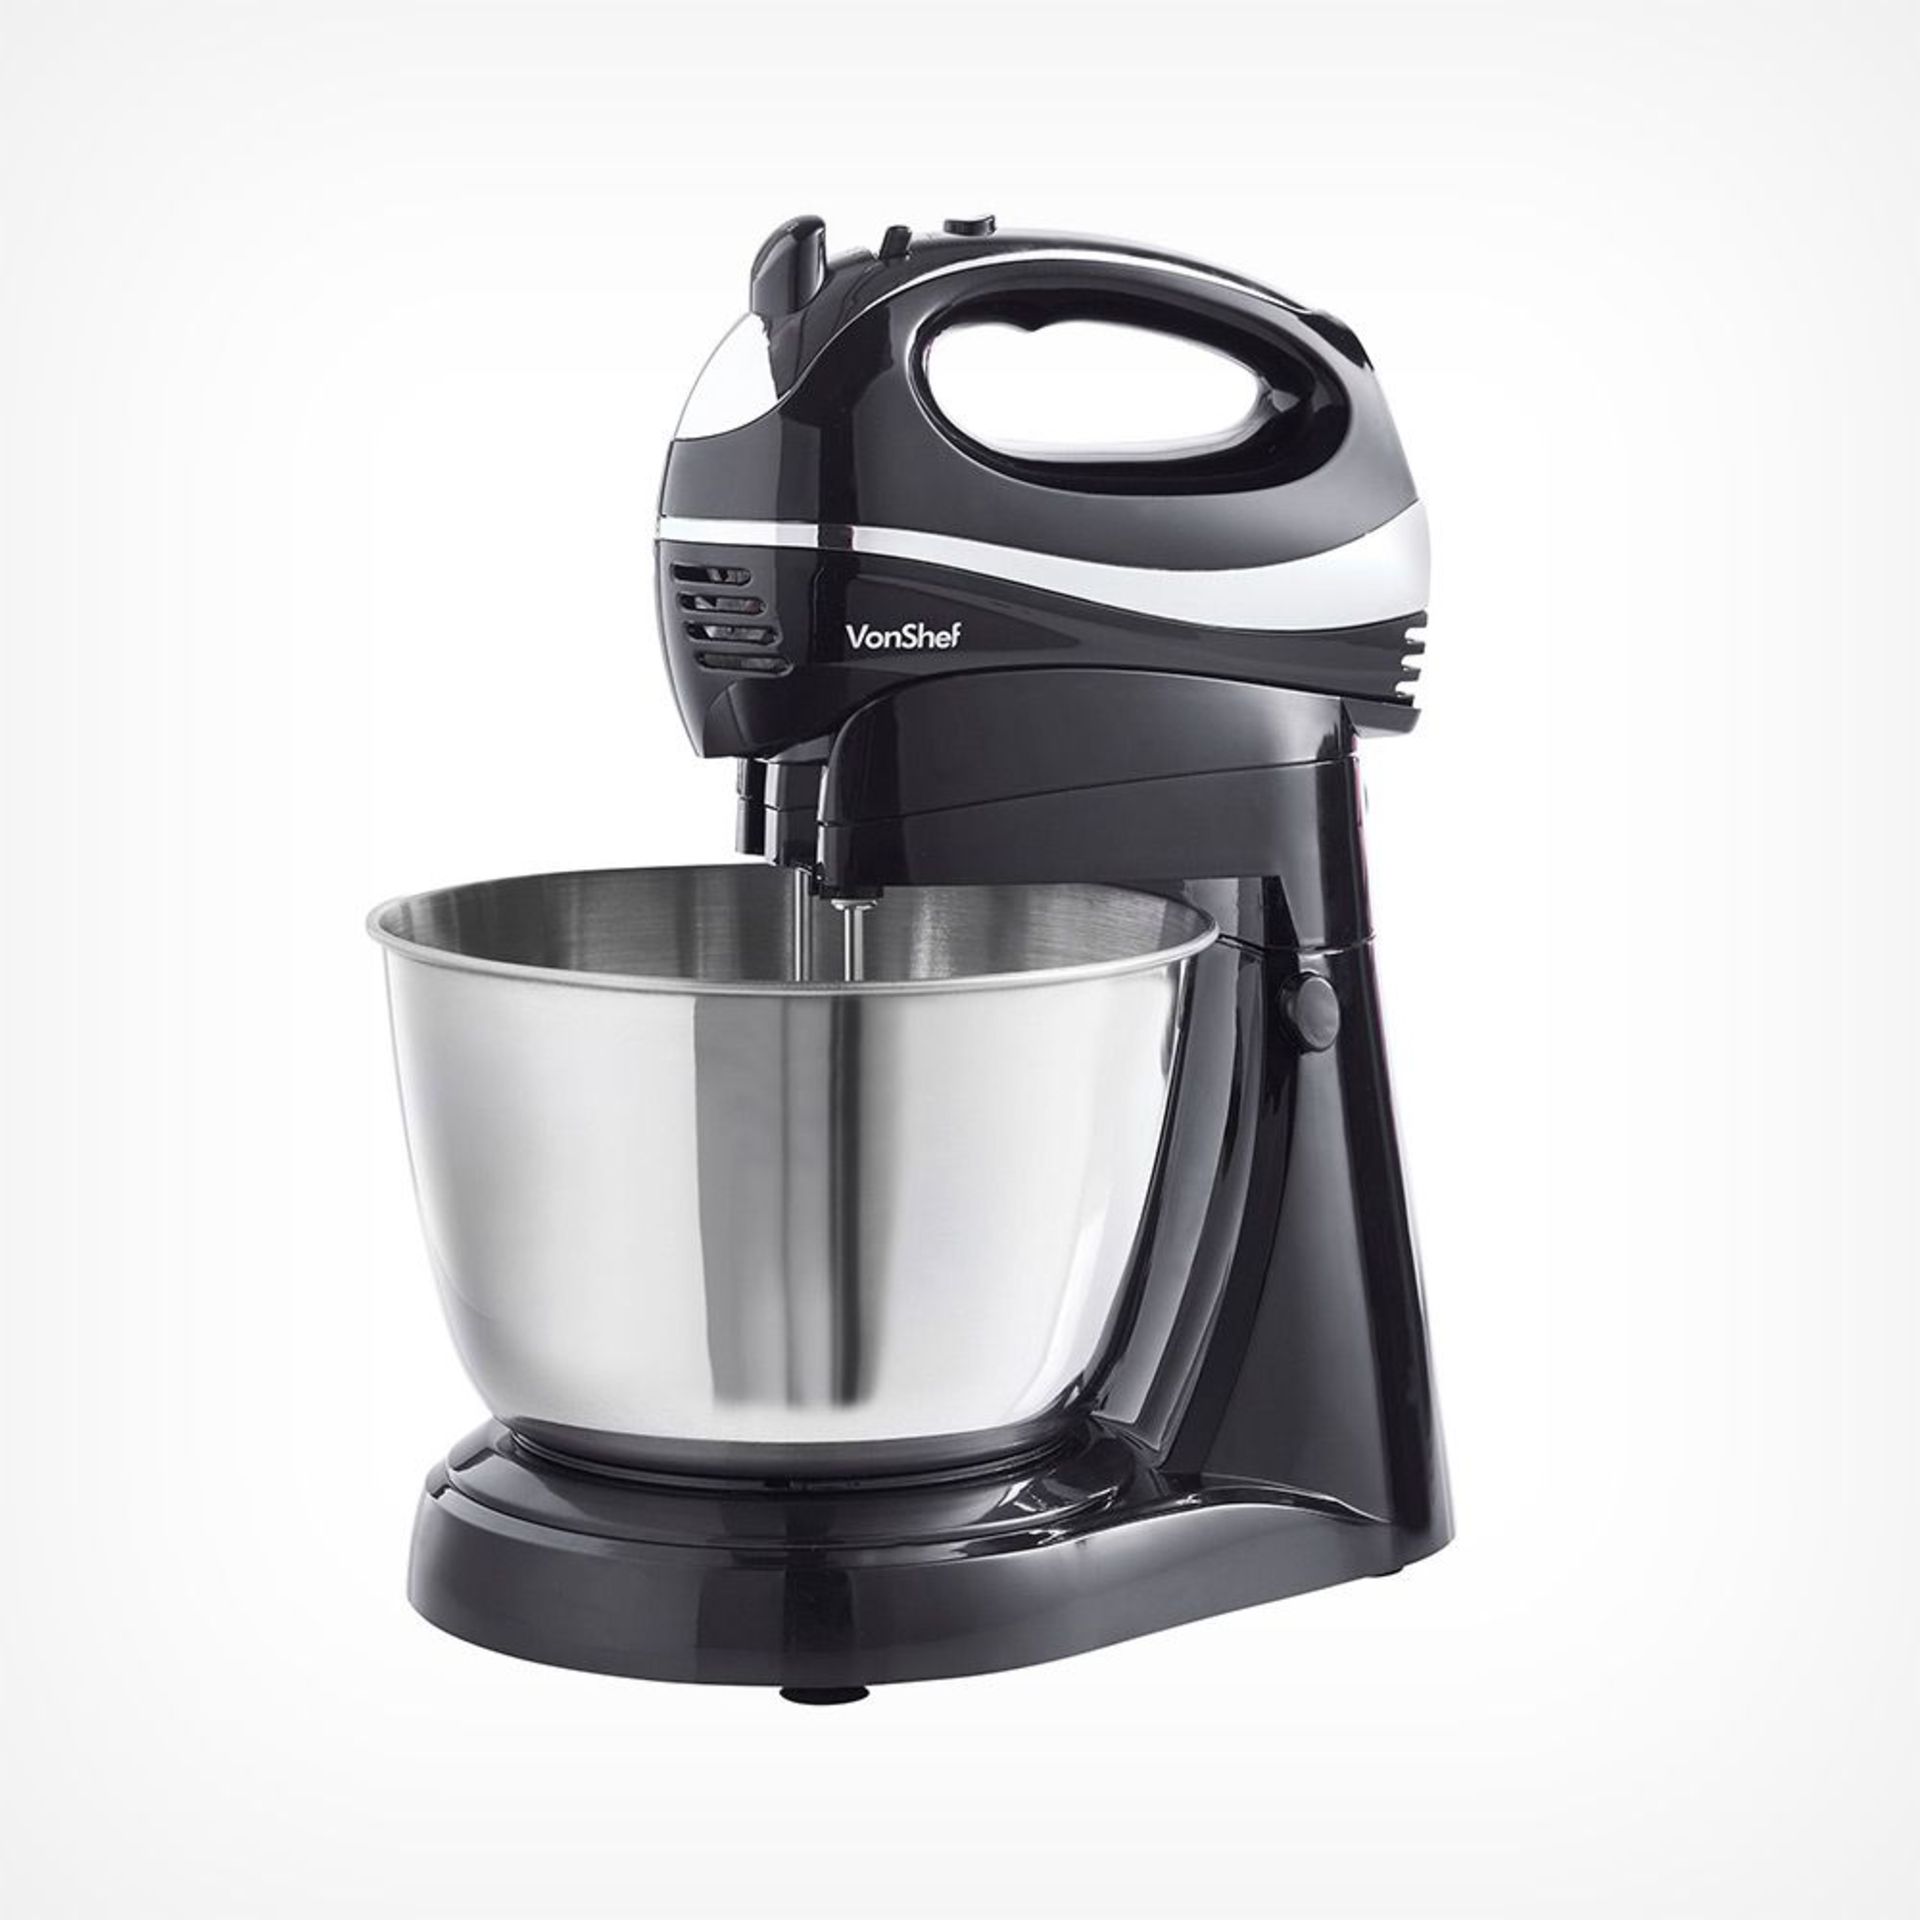 Black Hand & Stand Mixer. Whisking, mixing and kneading just got simpler, thanks to the dual-